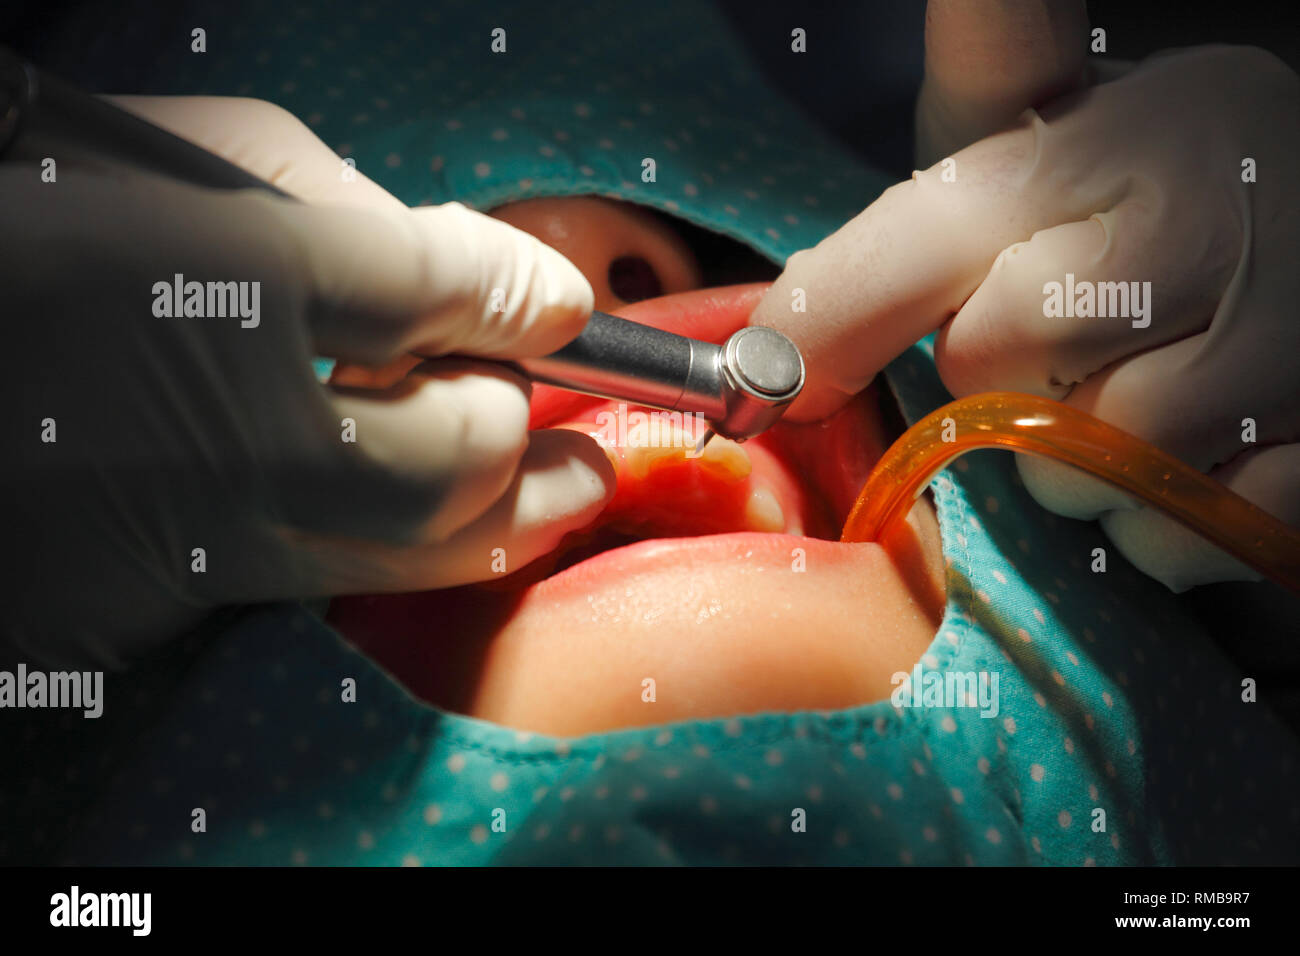 Closeup dental deep cleaning by scaling plaque from patient teeth Stock Photo